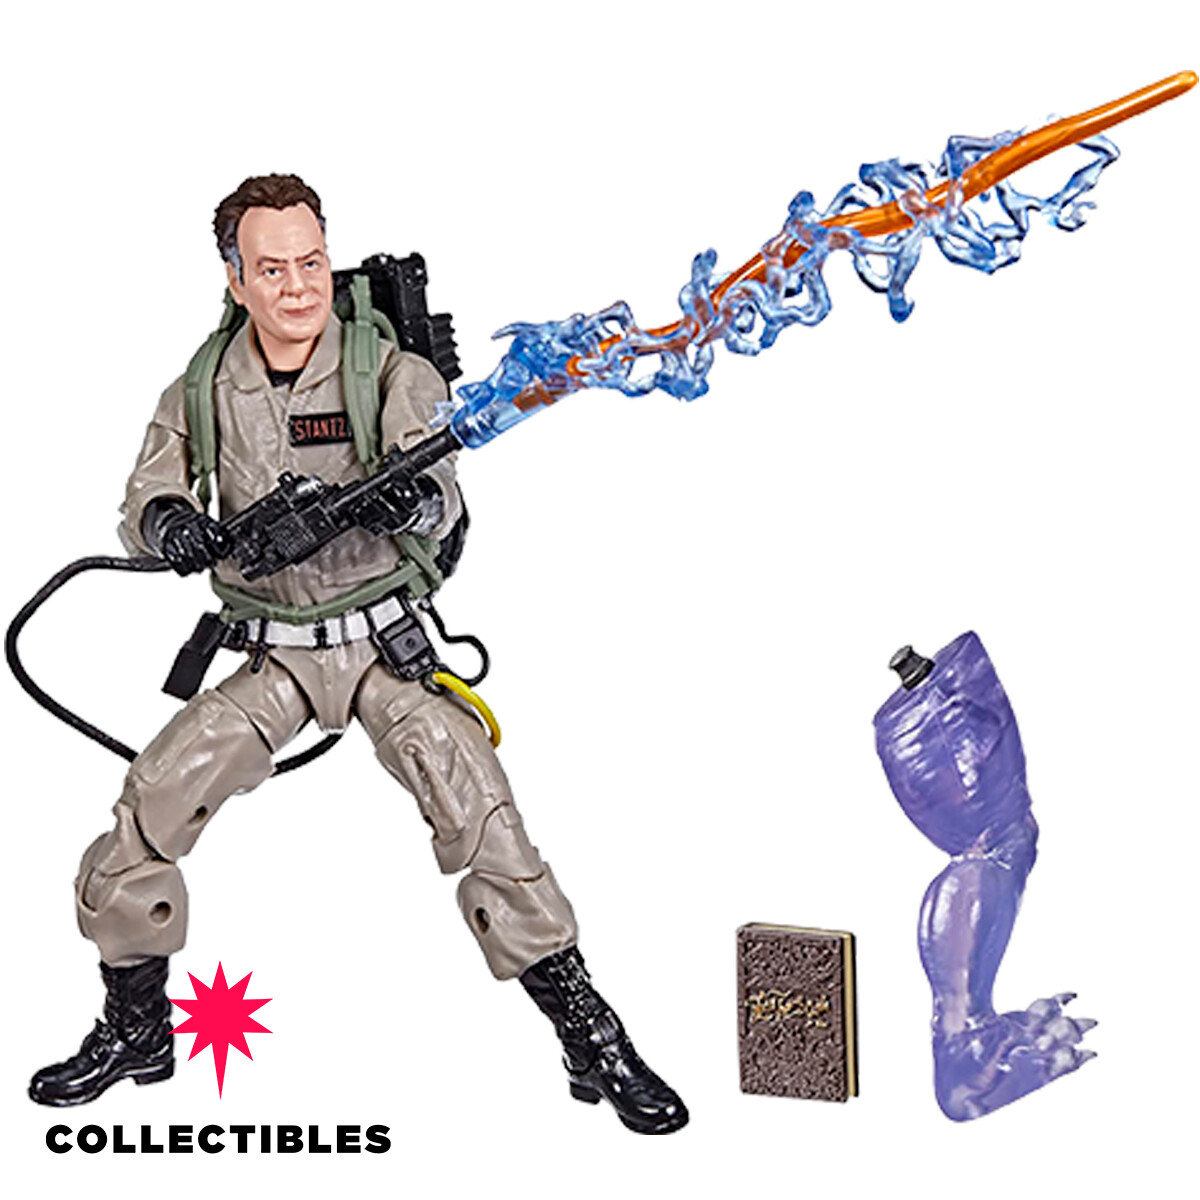 GHOSTBUSTERS! AFTER LIFE PLASMA SERIES RAY STANTZ 2021 